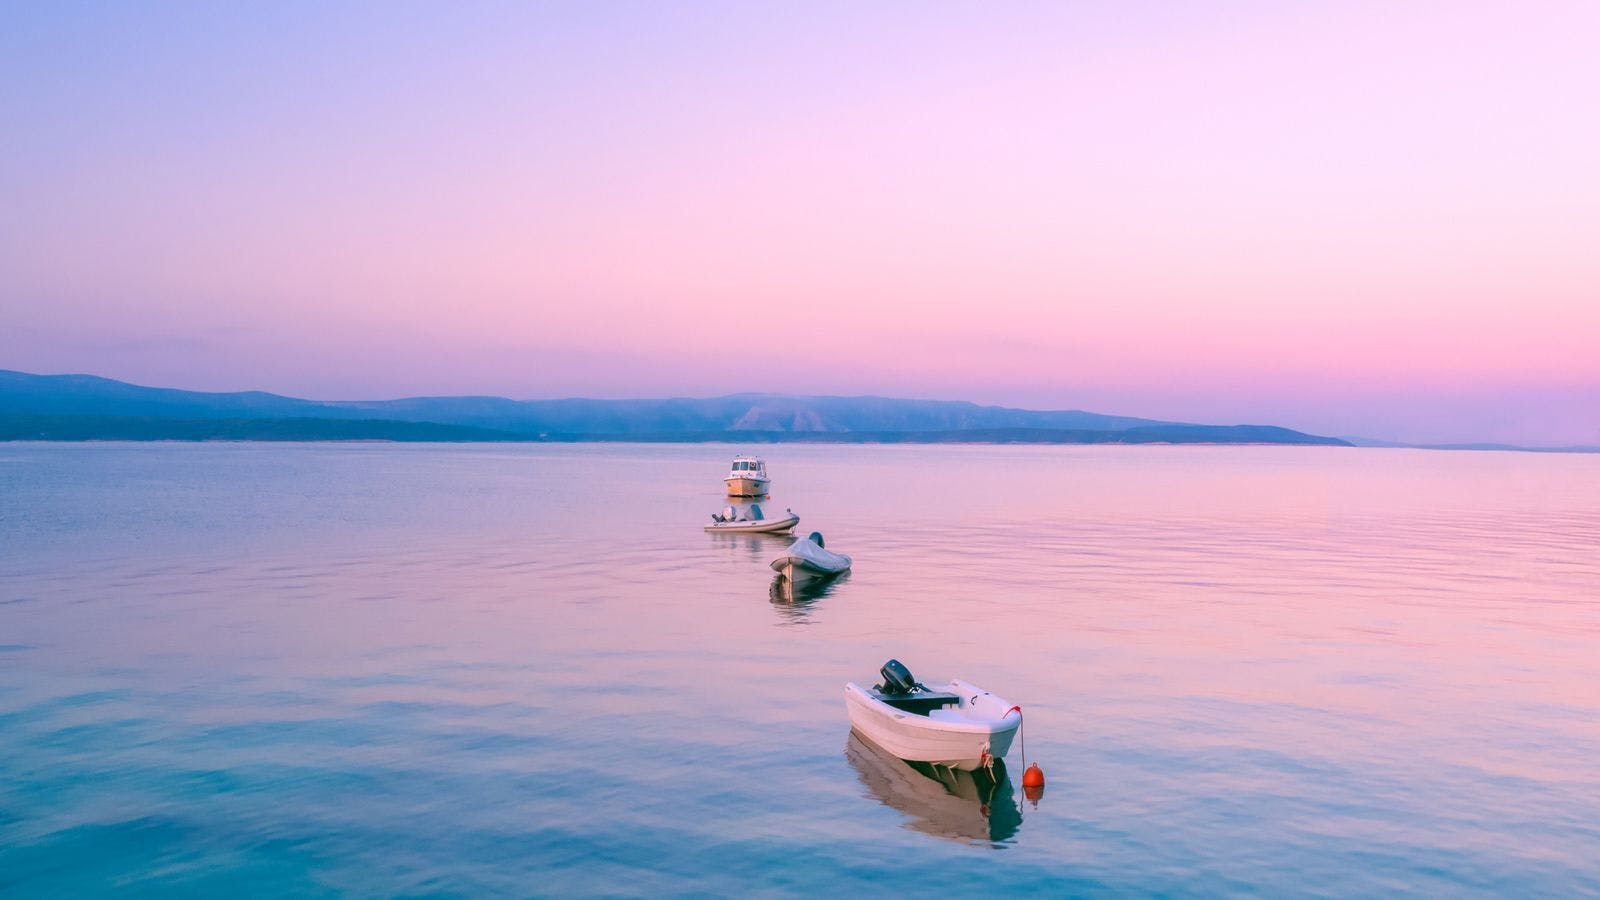 Three boats floating int he water under a pink sunset sky